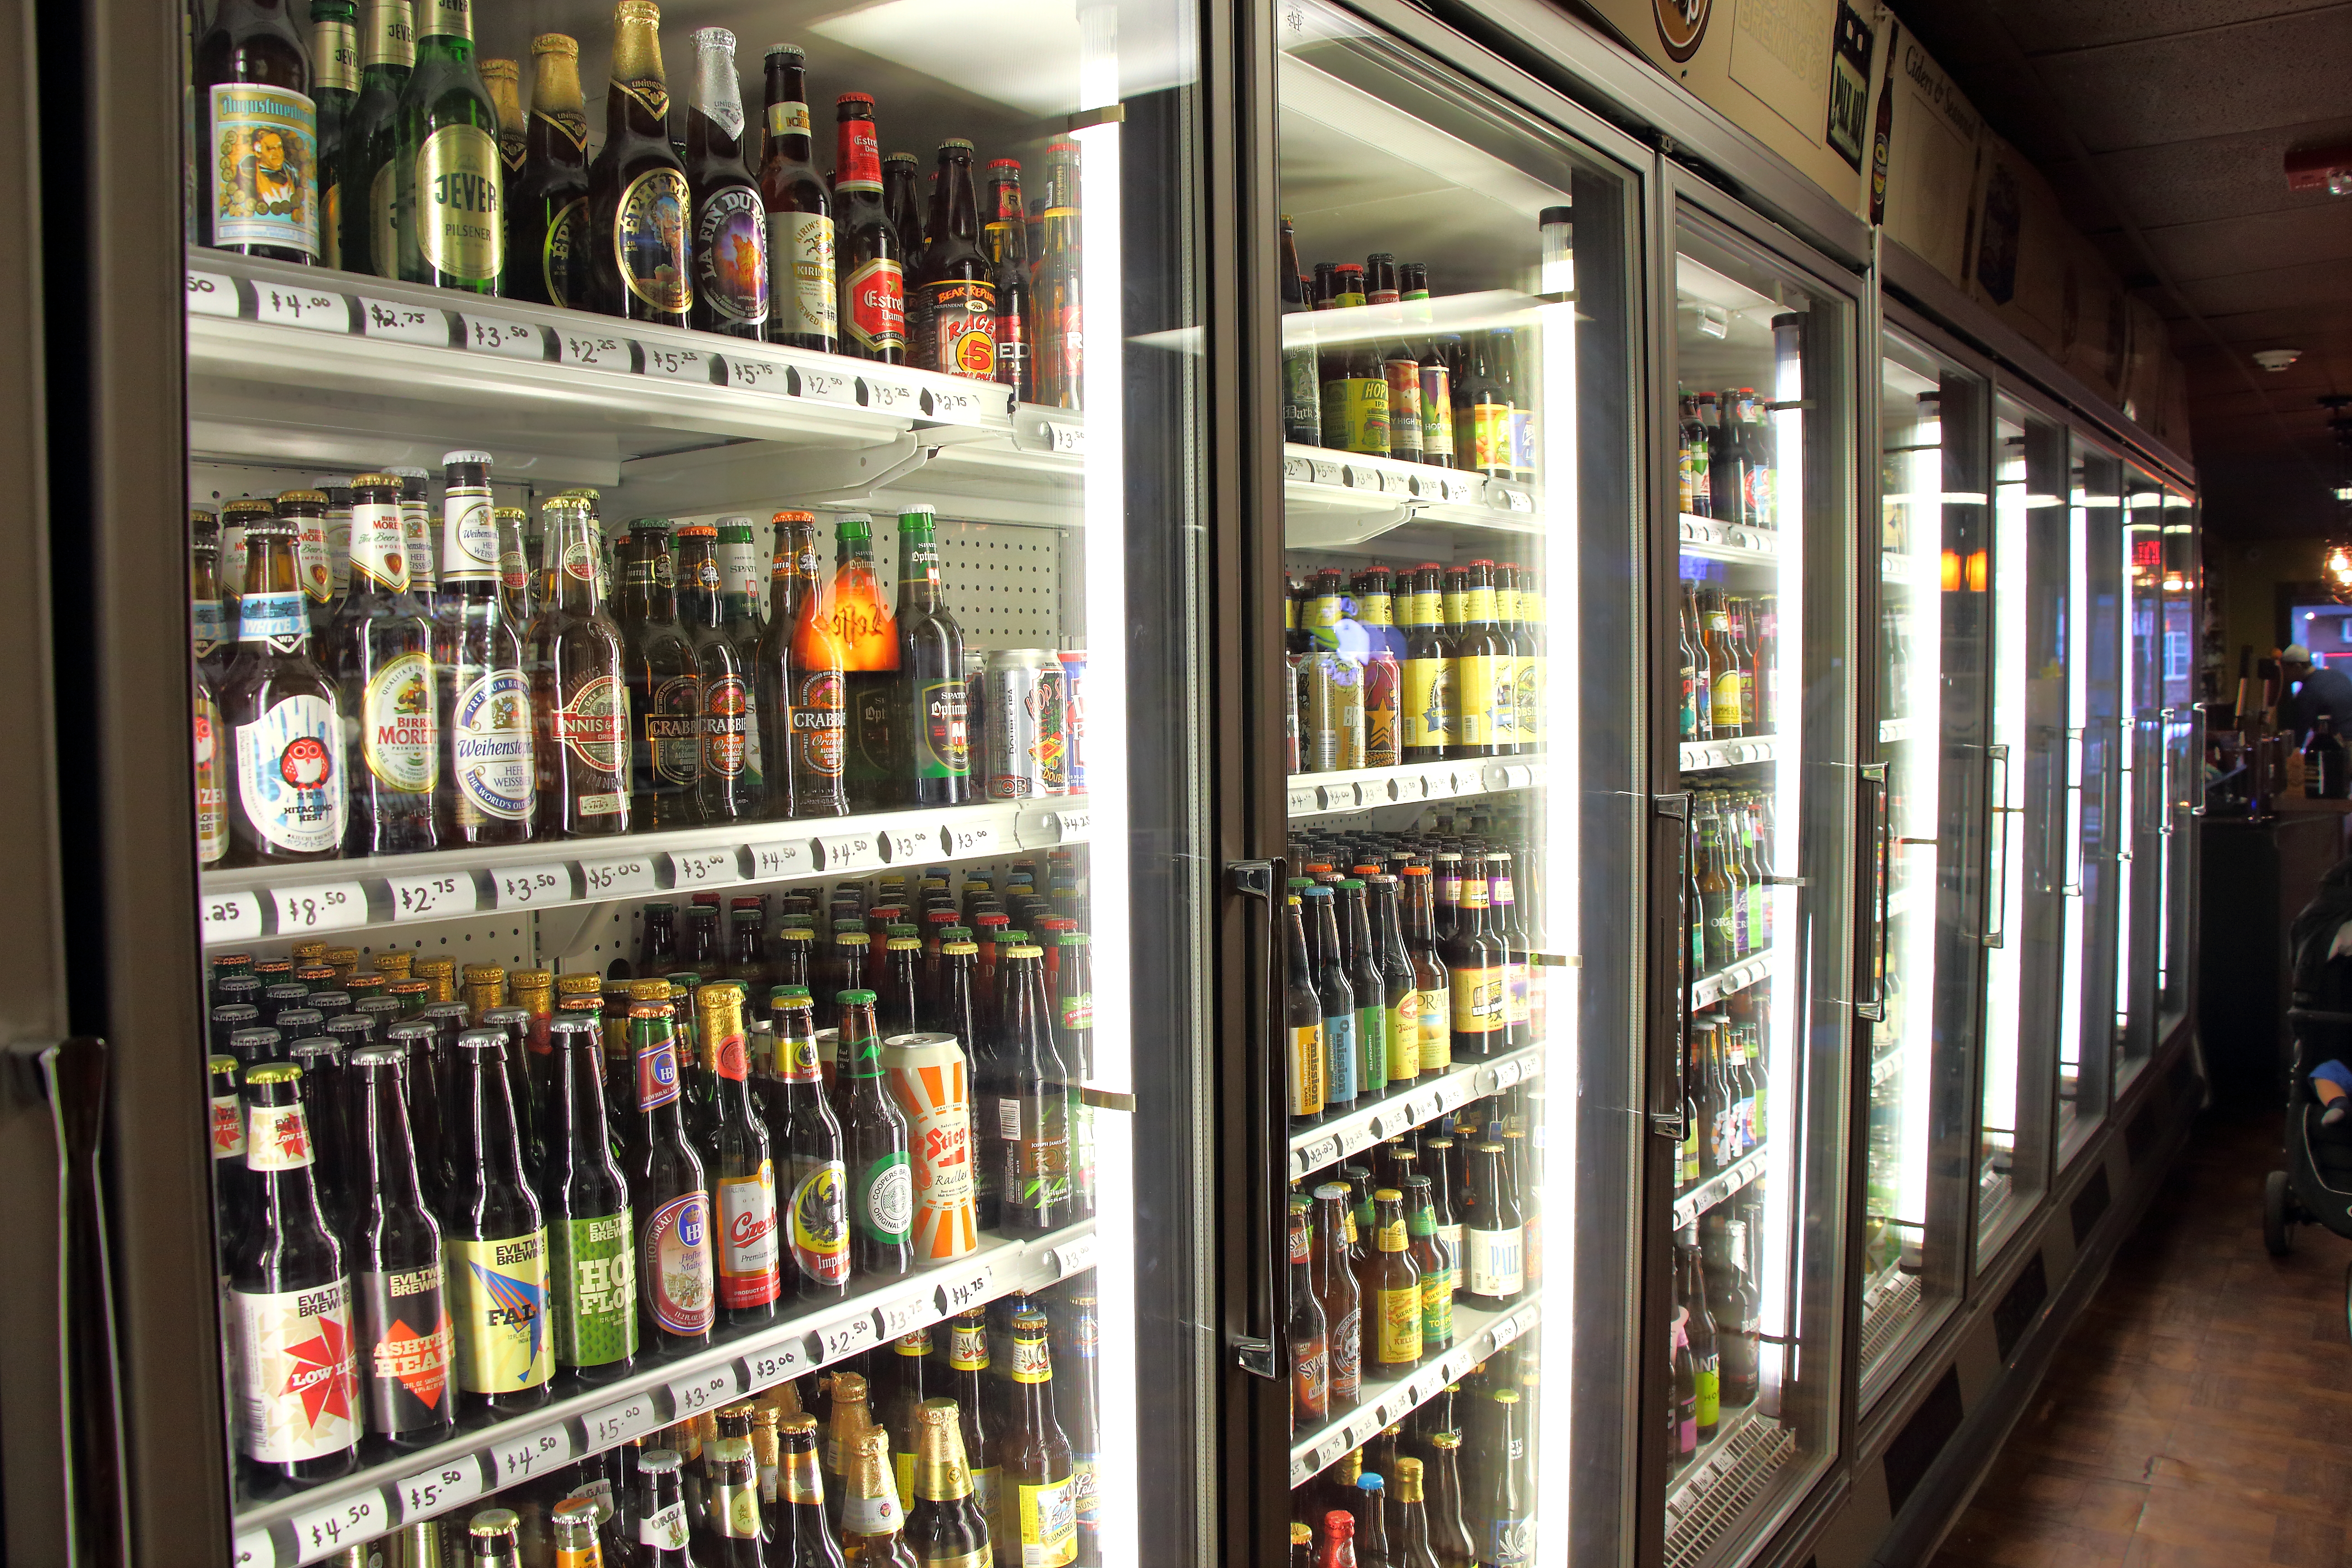 Top 5 Craft Beer Bottle Shops in Philly - Wooder Ice